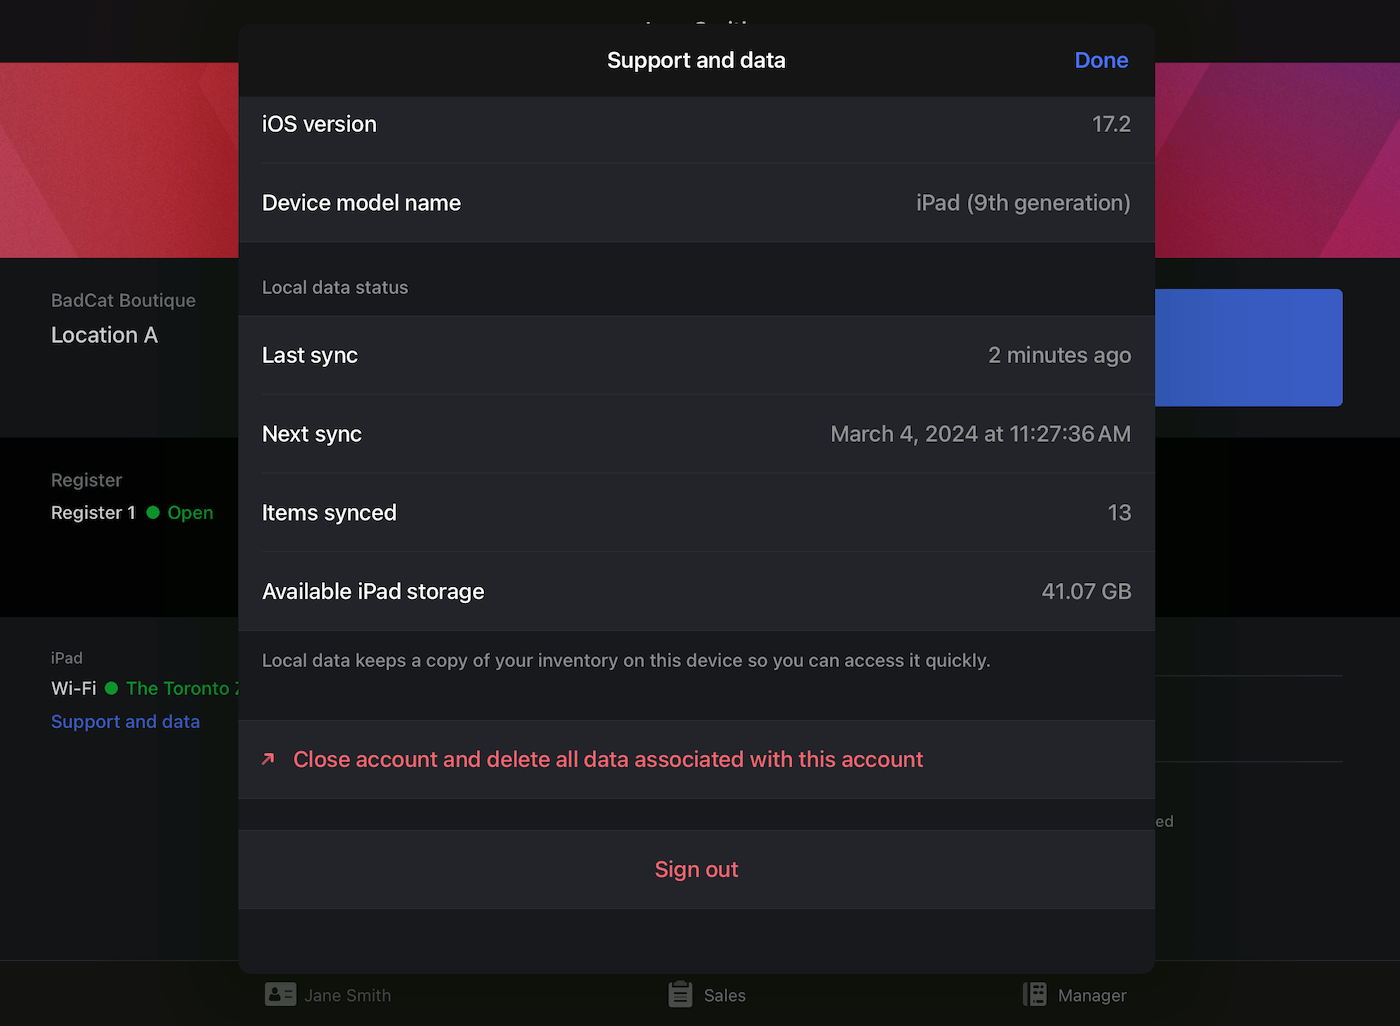 Support and data menu with sign out option.